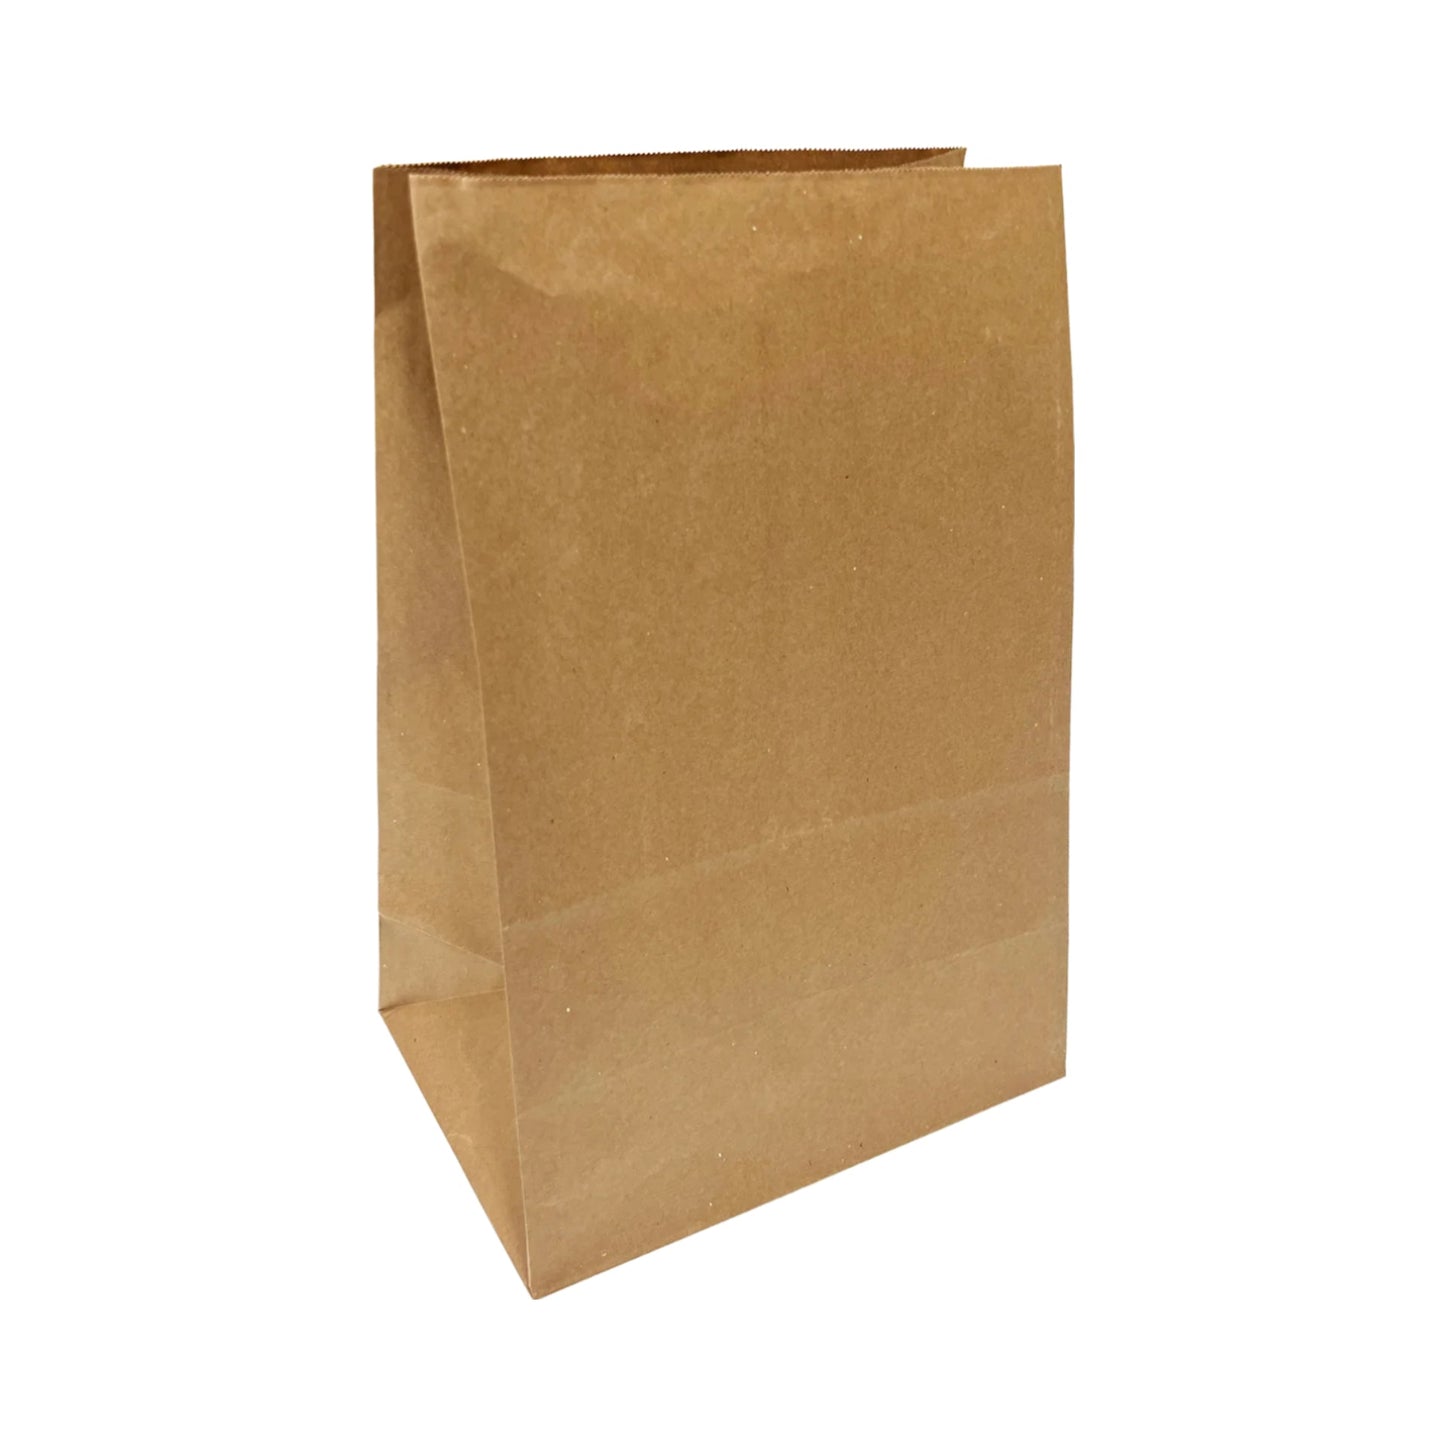 500pcs #5 Grocery Bags 5.25x3.25x11 inches; $0.03/pc